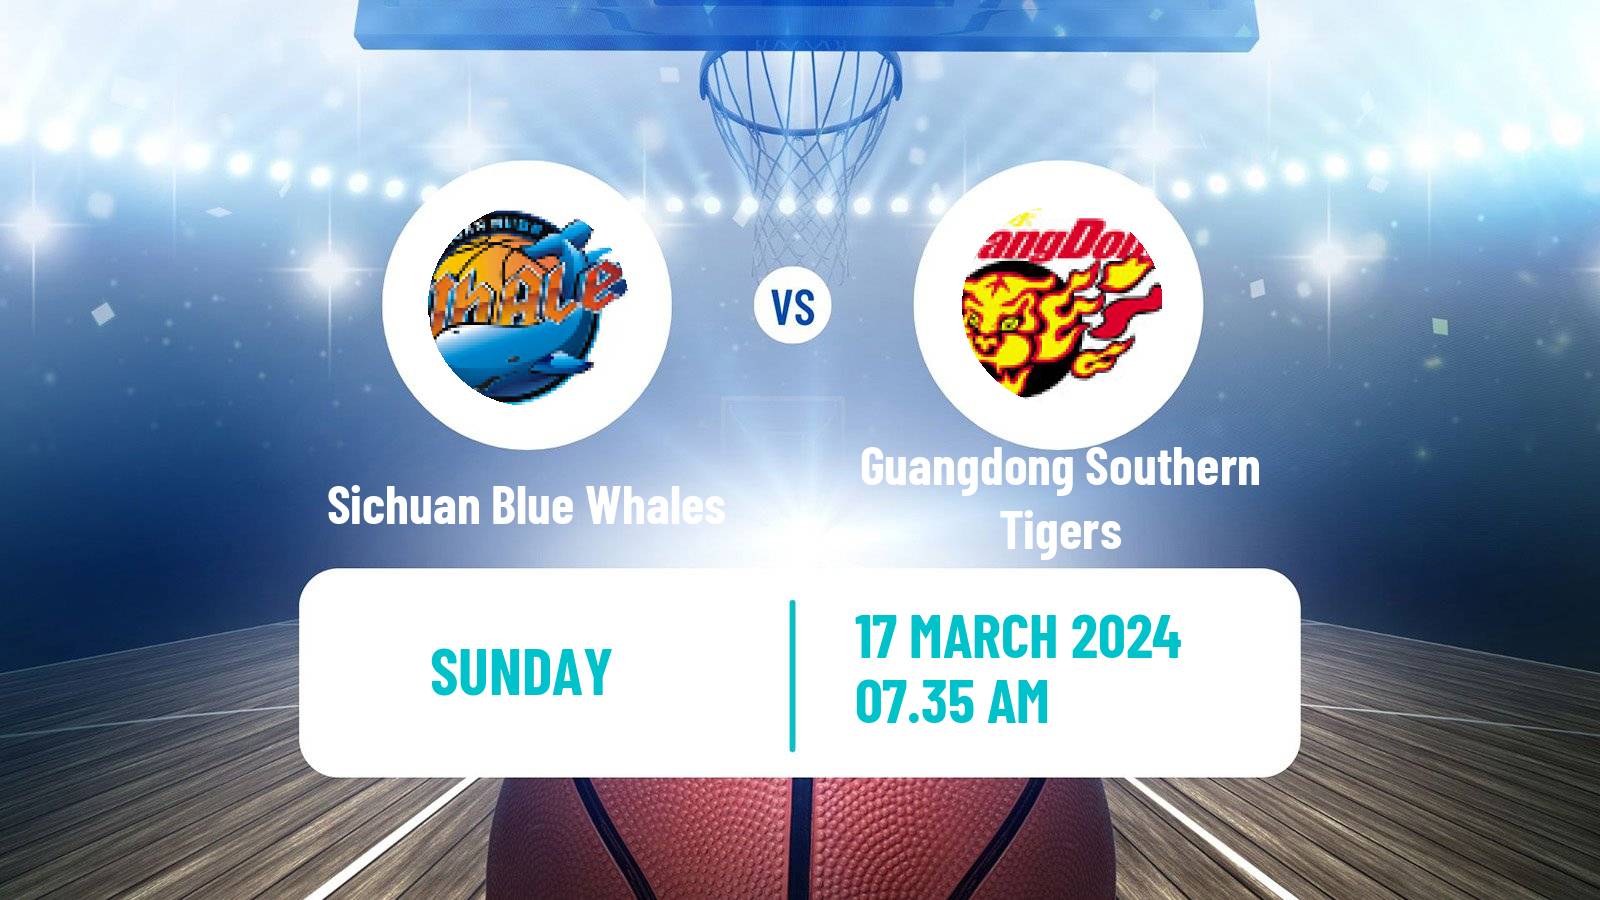 Basketball CBA Sichuan Blue Whales - Guangdong Southern Tigers